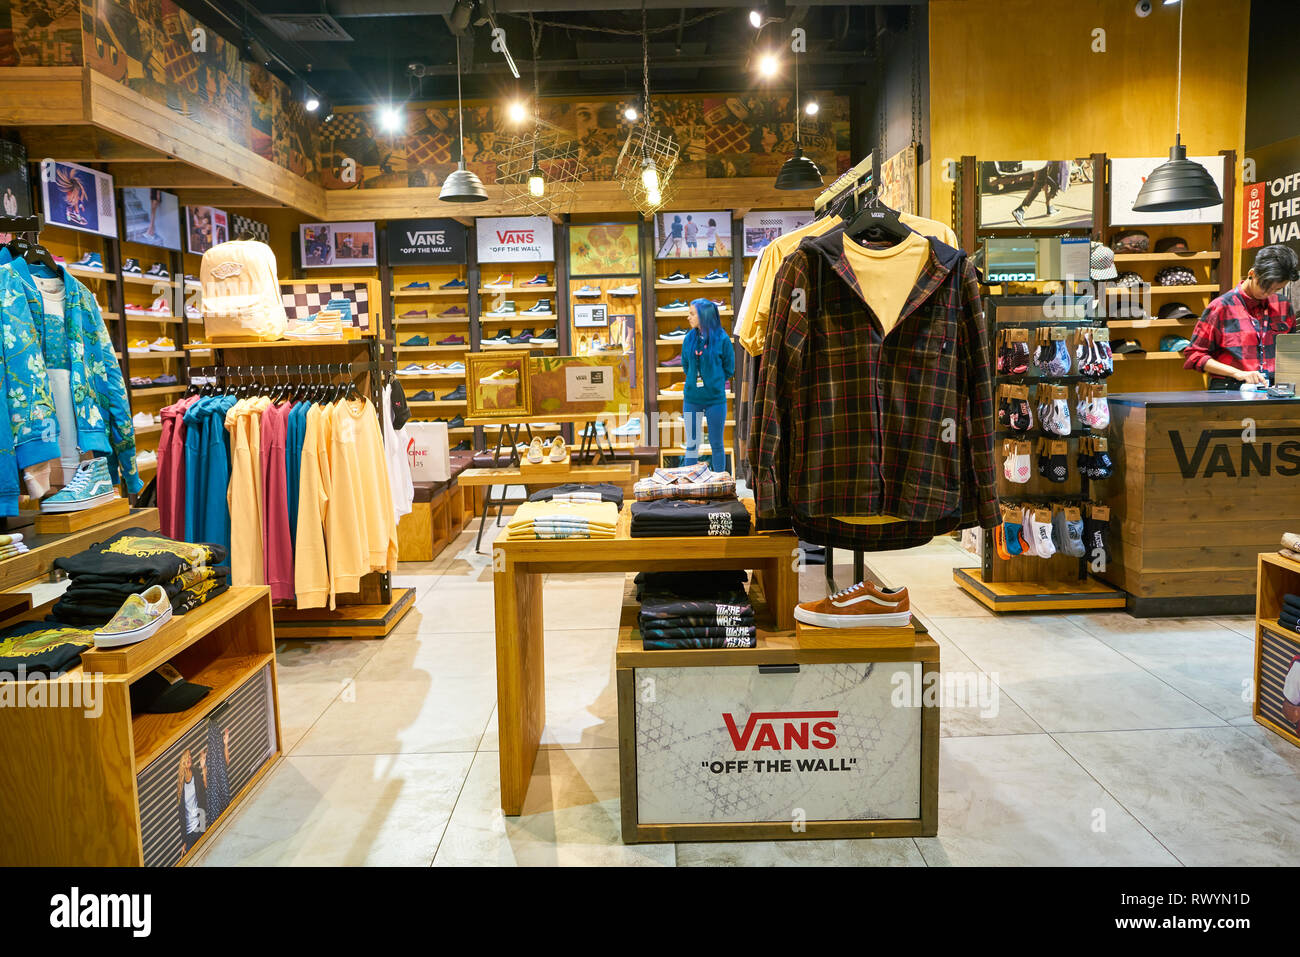 Vans Shop High Resolution Stock Photography and Images - Alamy